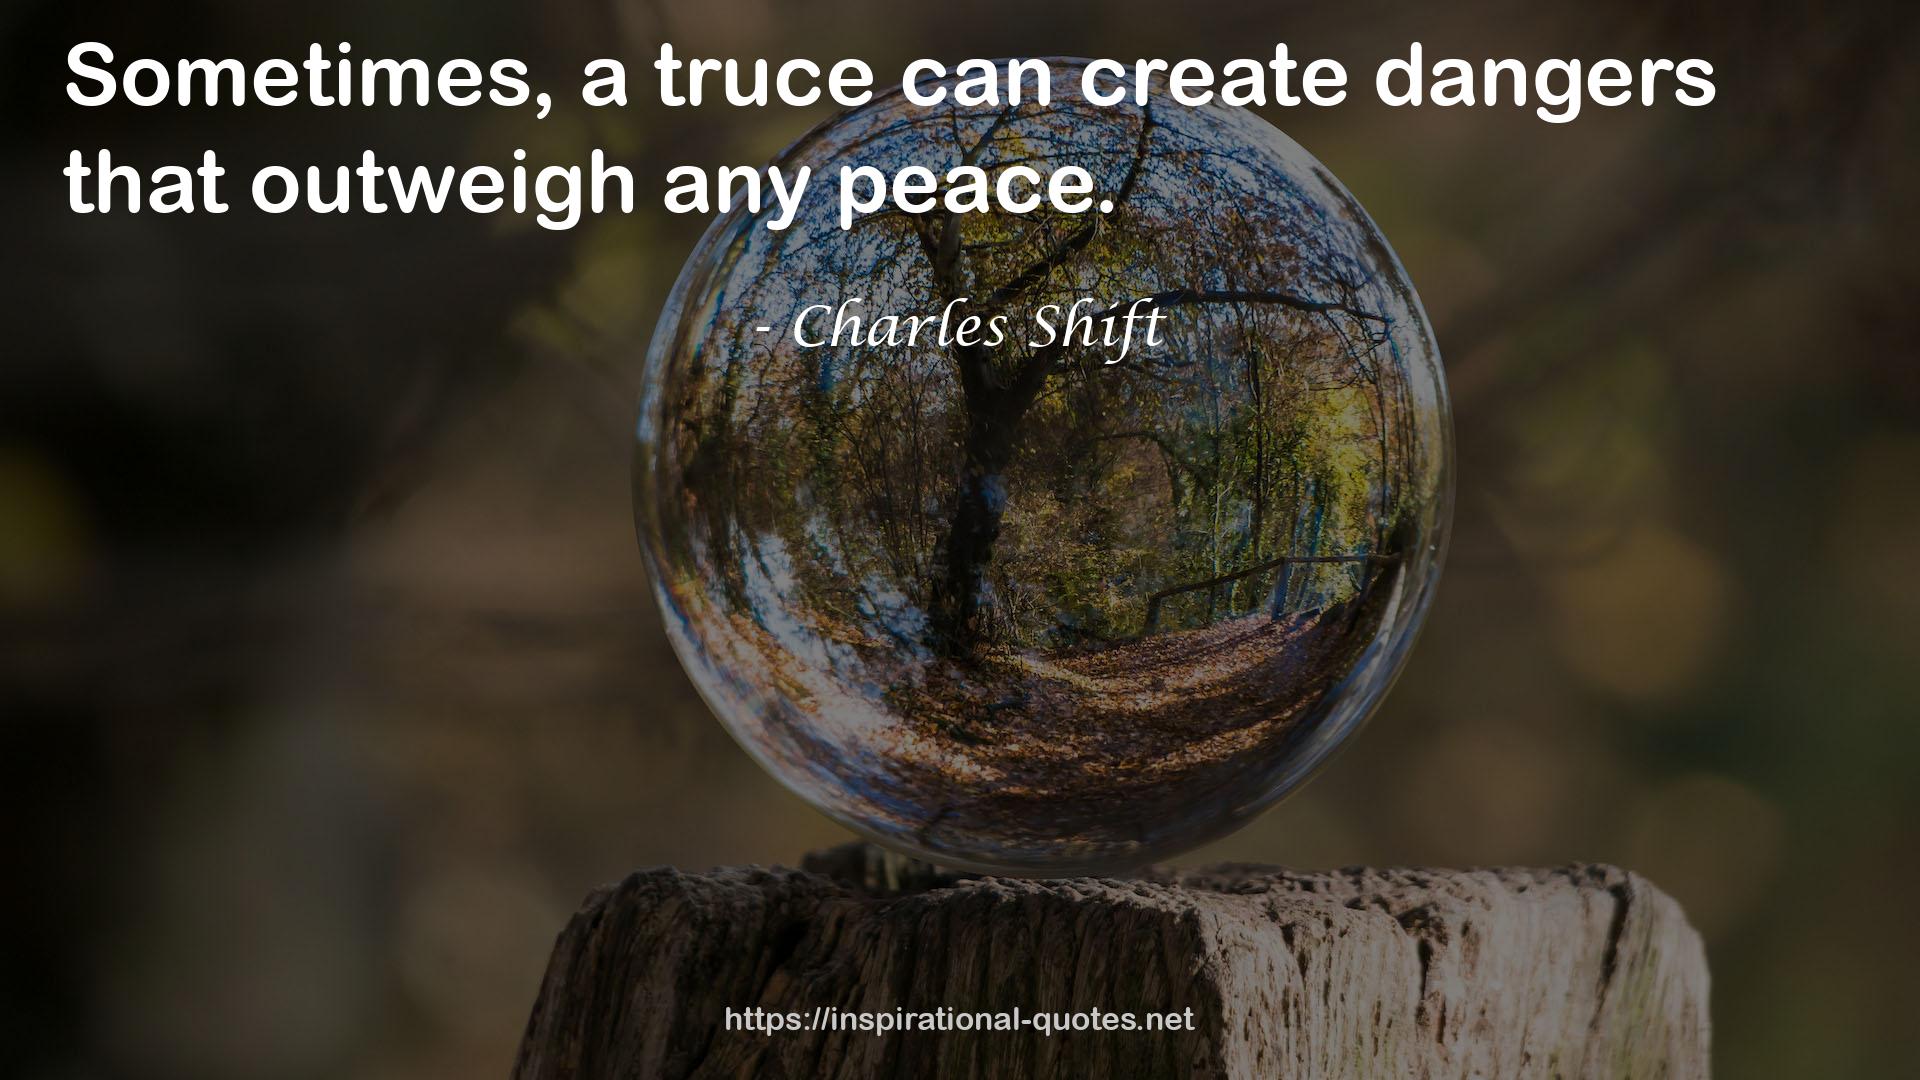 Charles Shift QUOTES